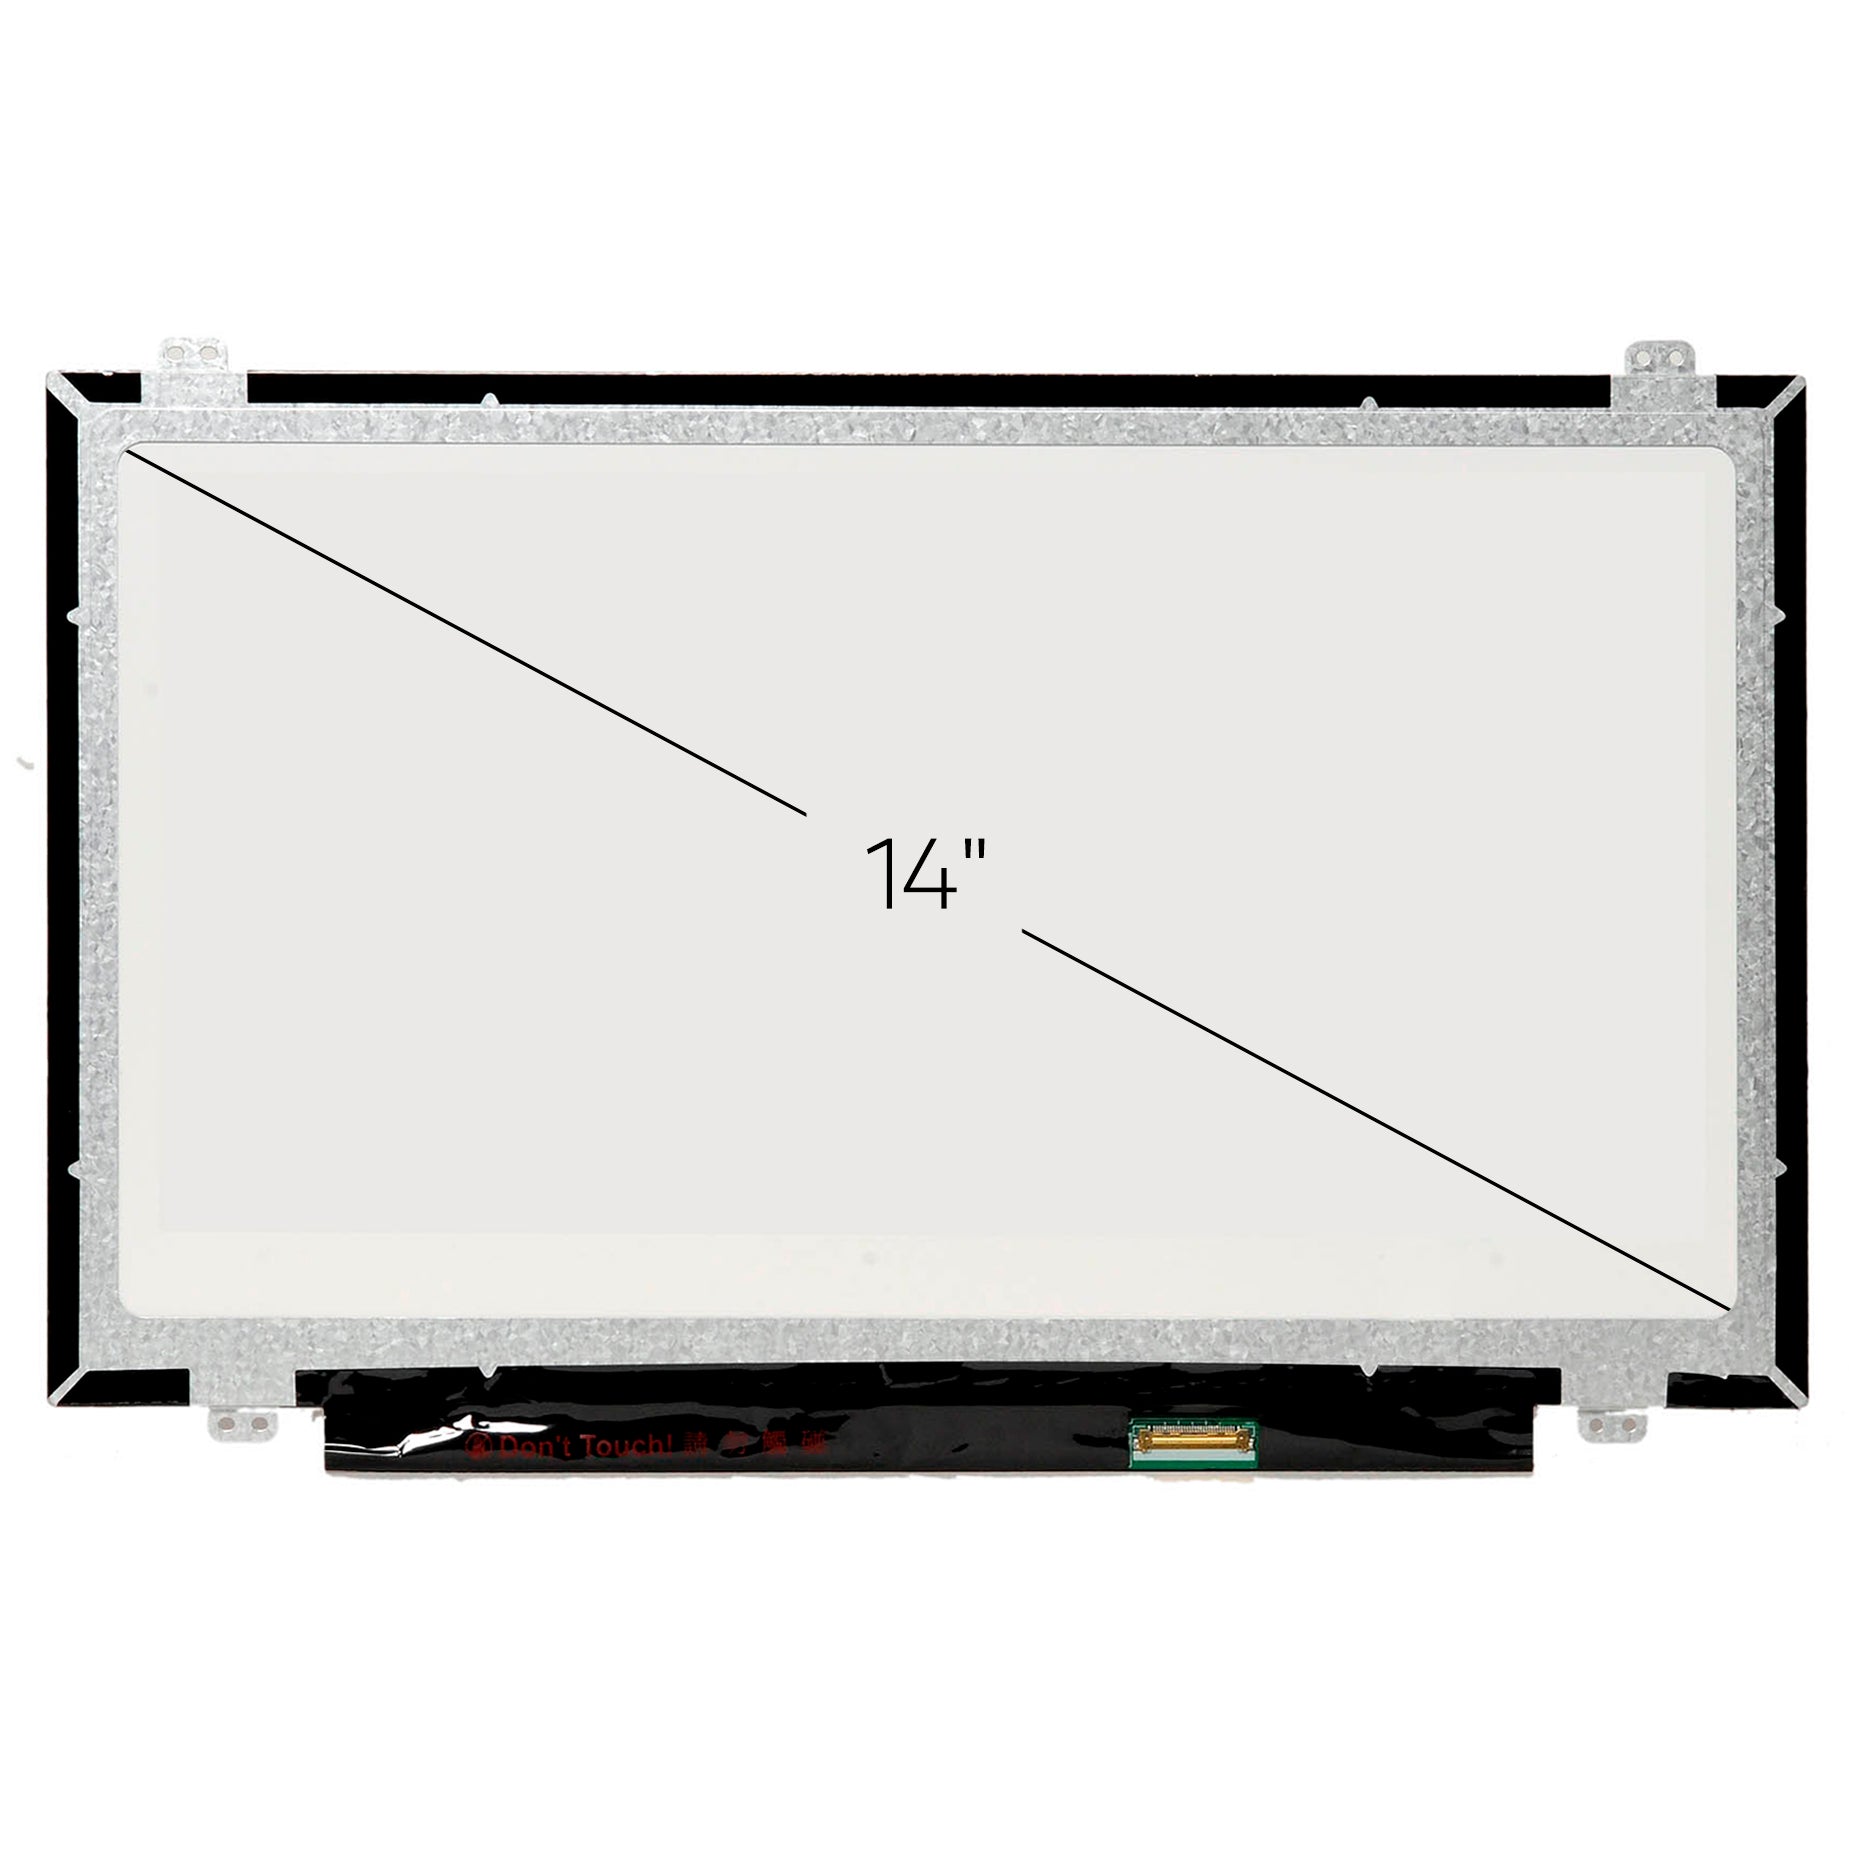 Screen Replacement for Dell P/N 937MP DP/N 0937MP HD 1366x768 Glossy LCD LED Display